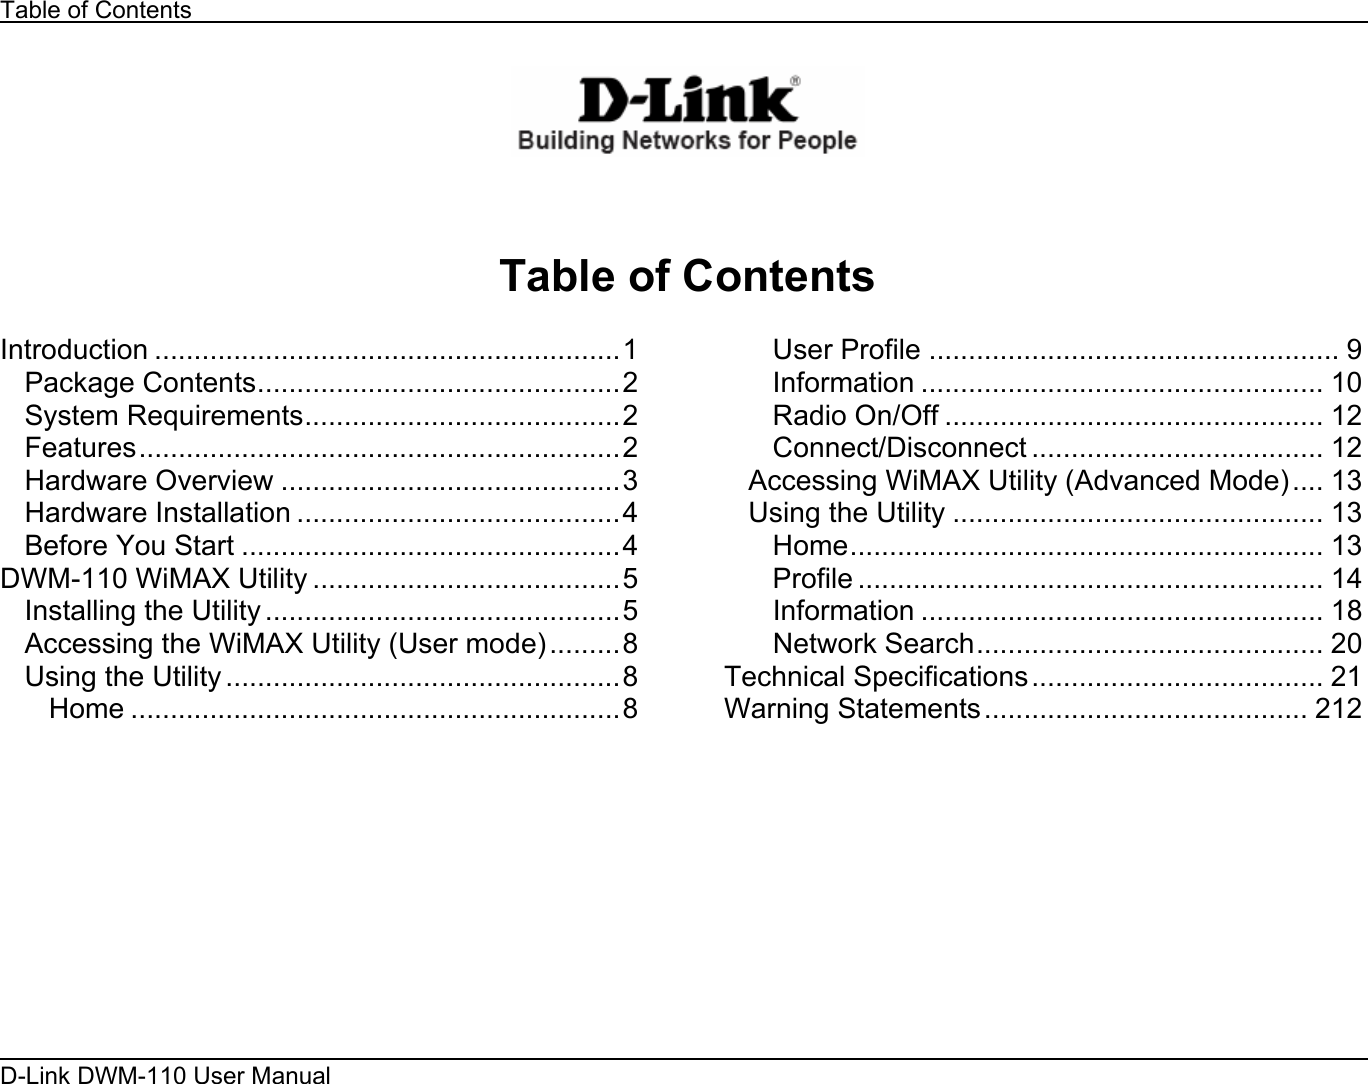 Table of Contents D-Link DWM-110 User Manual       Table of Contents  Introduction ...........................................................1 Package Contents..............................................2 System Requirements........................................2 Features.............................................................2 Hardware Overview ...........................................3 Hardware Installation .........................................4 Before You Start ................................................4 DWM-110 WiMAX Utility .......................................5 Installing the Utility .............................................5 Accessing the WiMAX Utility (User mode).........8 Using the Utility ..................................................8 Home ..............................................................8 User Profile .................................................... 9 Information ................................................... 10 Radio On/Off ................................................ 12 Connect/Disconnect ..................................... 12 Accessing WiMAX Utility (Advanced Mode).... 13 Using the Utility ............................................... 13 Home............................................................ 13 Profile ........................................................... 14 Information ................................................... 18 Network Search............................................ 20 Technical Specifications..................................... 21 Warning Statements......................................... 212         